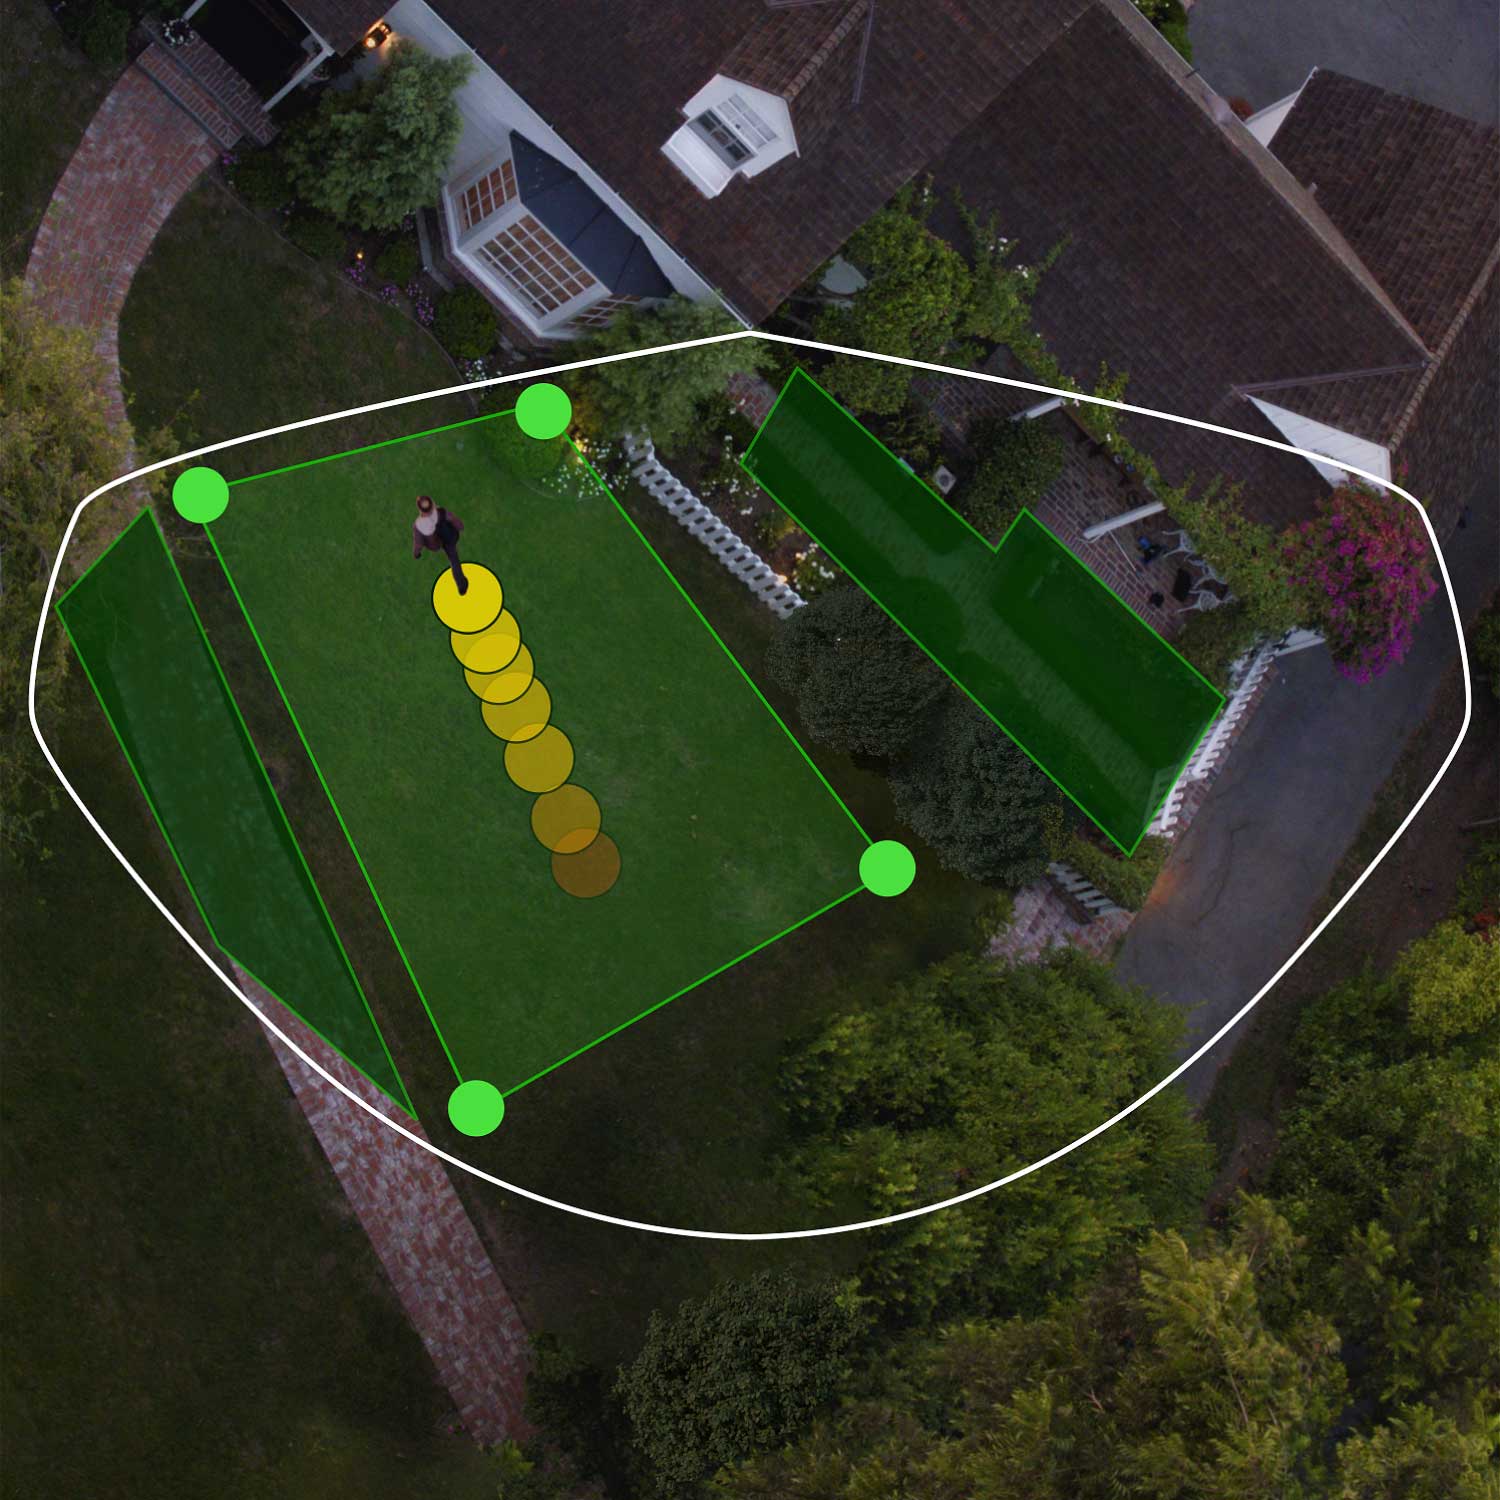 Floodlight Cam Wired Pro (Premium Colors) - Aerial view of front of house showing bird's eye view zones in green. Person walks toward front door, their path indicated by yellow dots.